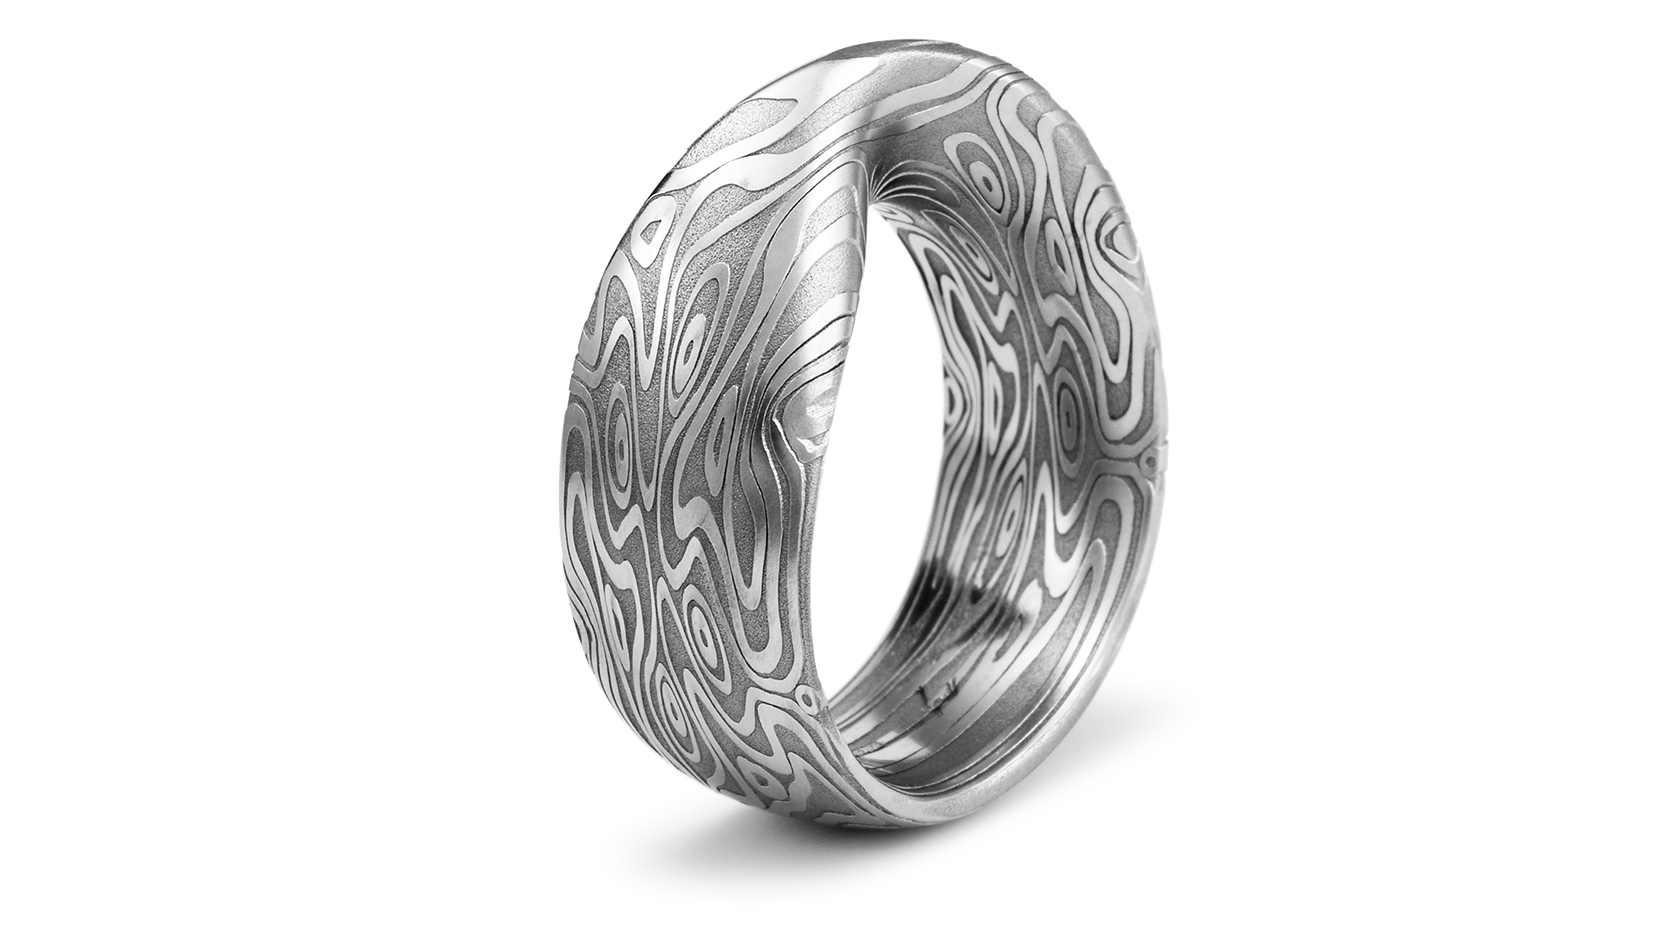  A seamless möbius strip ring custom carved from our Damascus. 